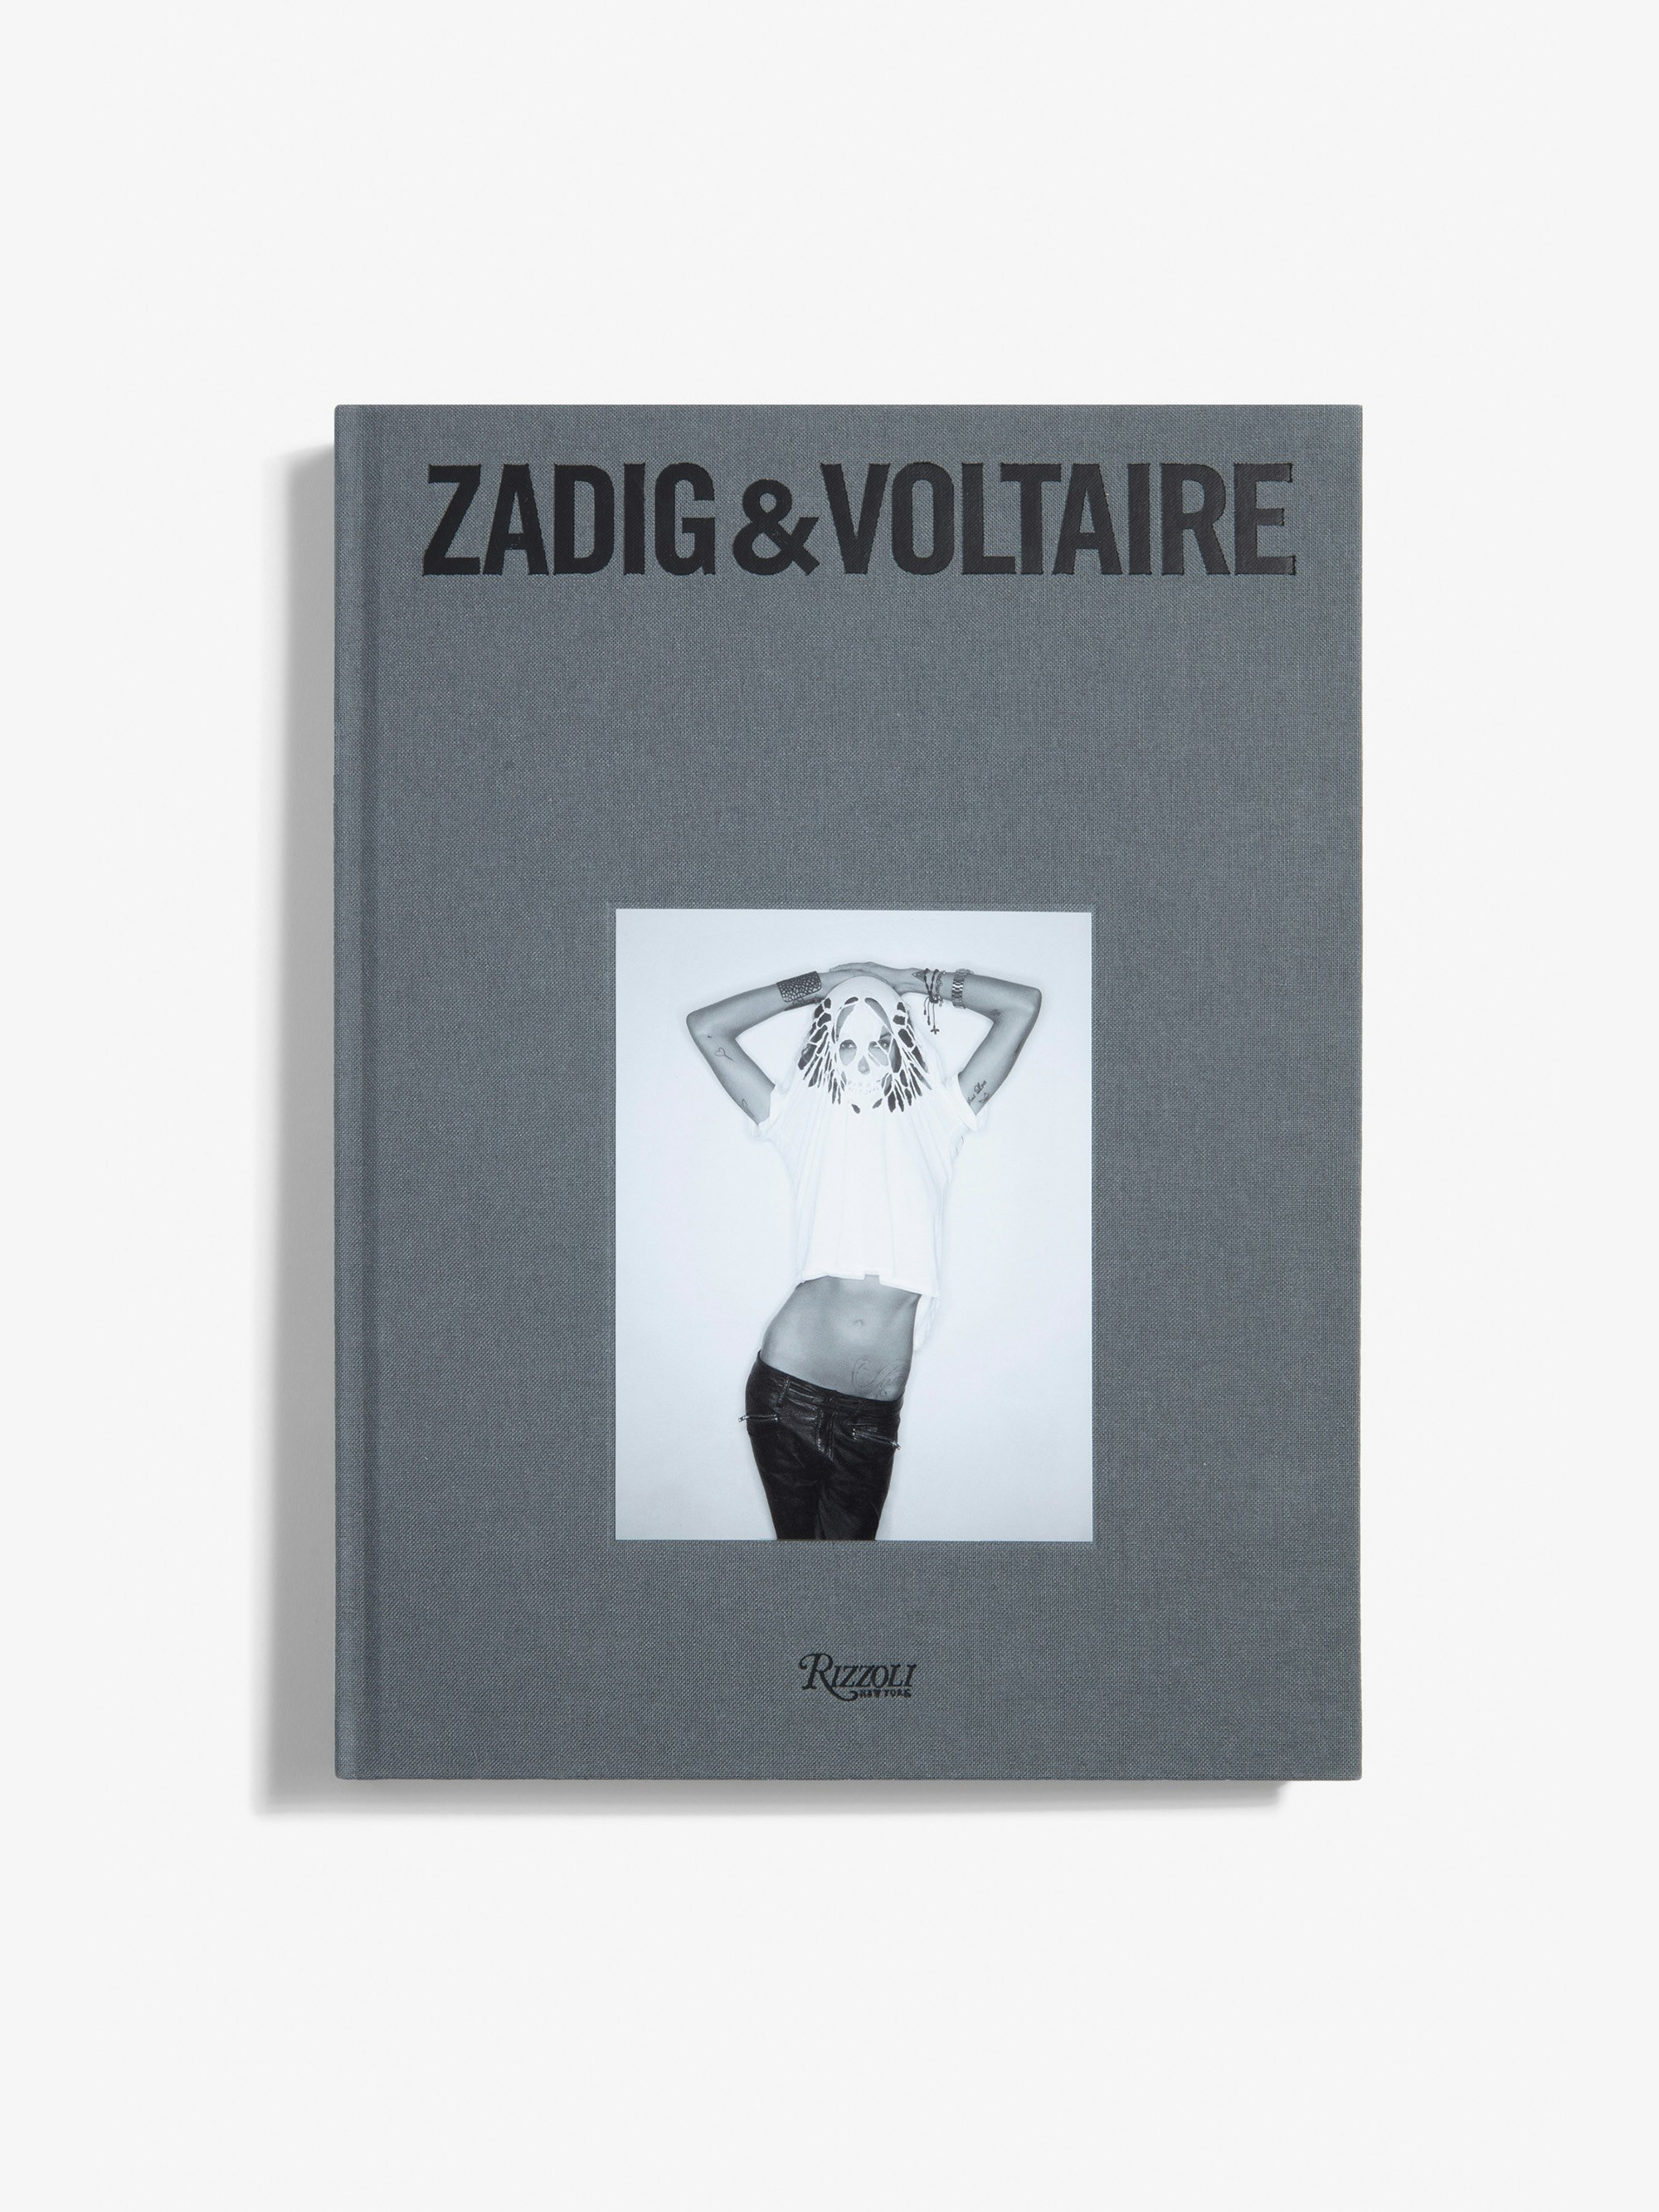 "Zadig&Voltaire: Established 1997 in Paris" Book - English Version - The first monograph on Zadig&Voltaire, published on the occasion of the brand’s 25th anniversary.